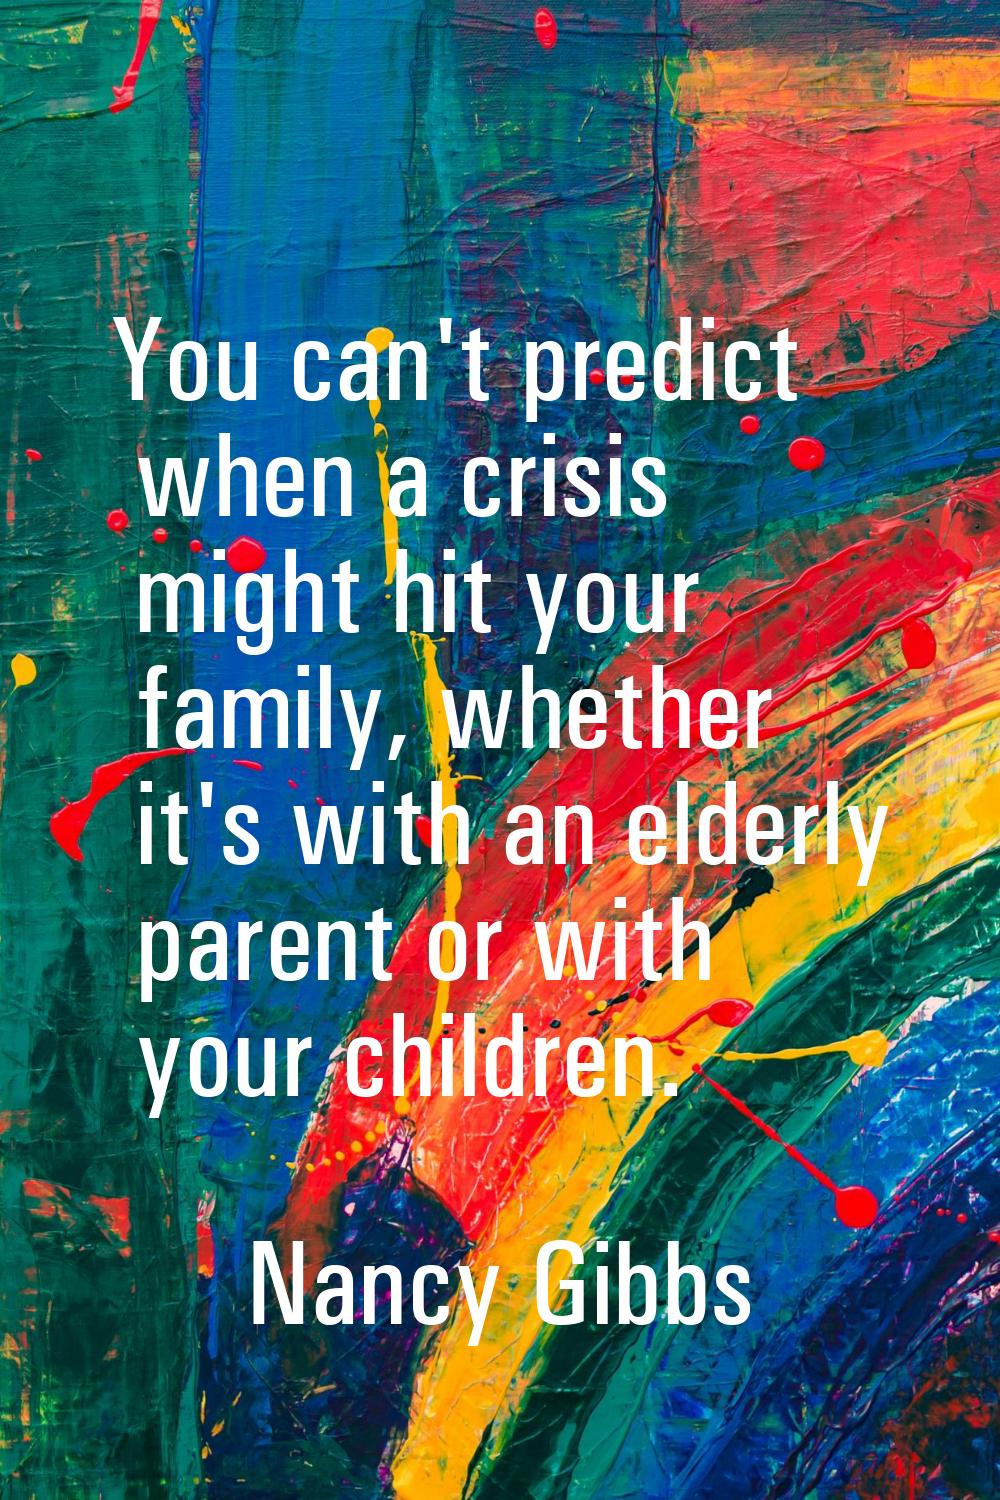 You can't predict when a crisis might hit your family, whether it's with an elderly parent or with 